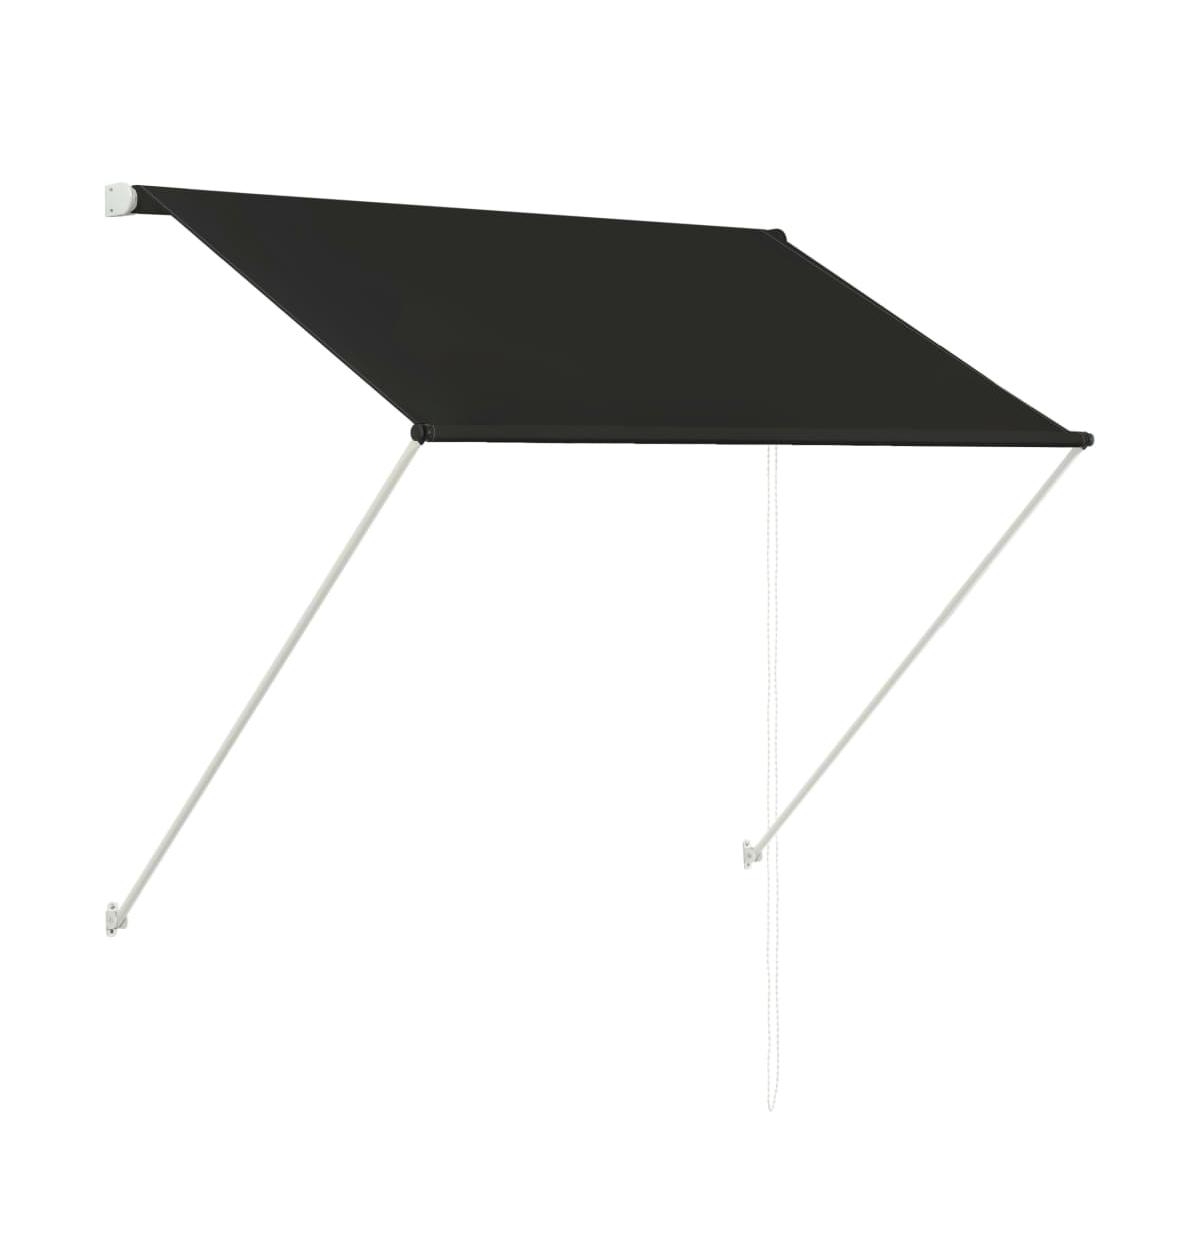 Retractable Awning 39.4"x59.1" Anthracite - Dark Grey